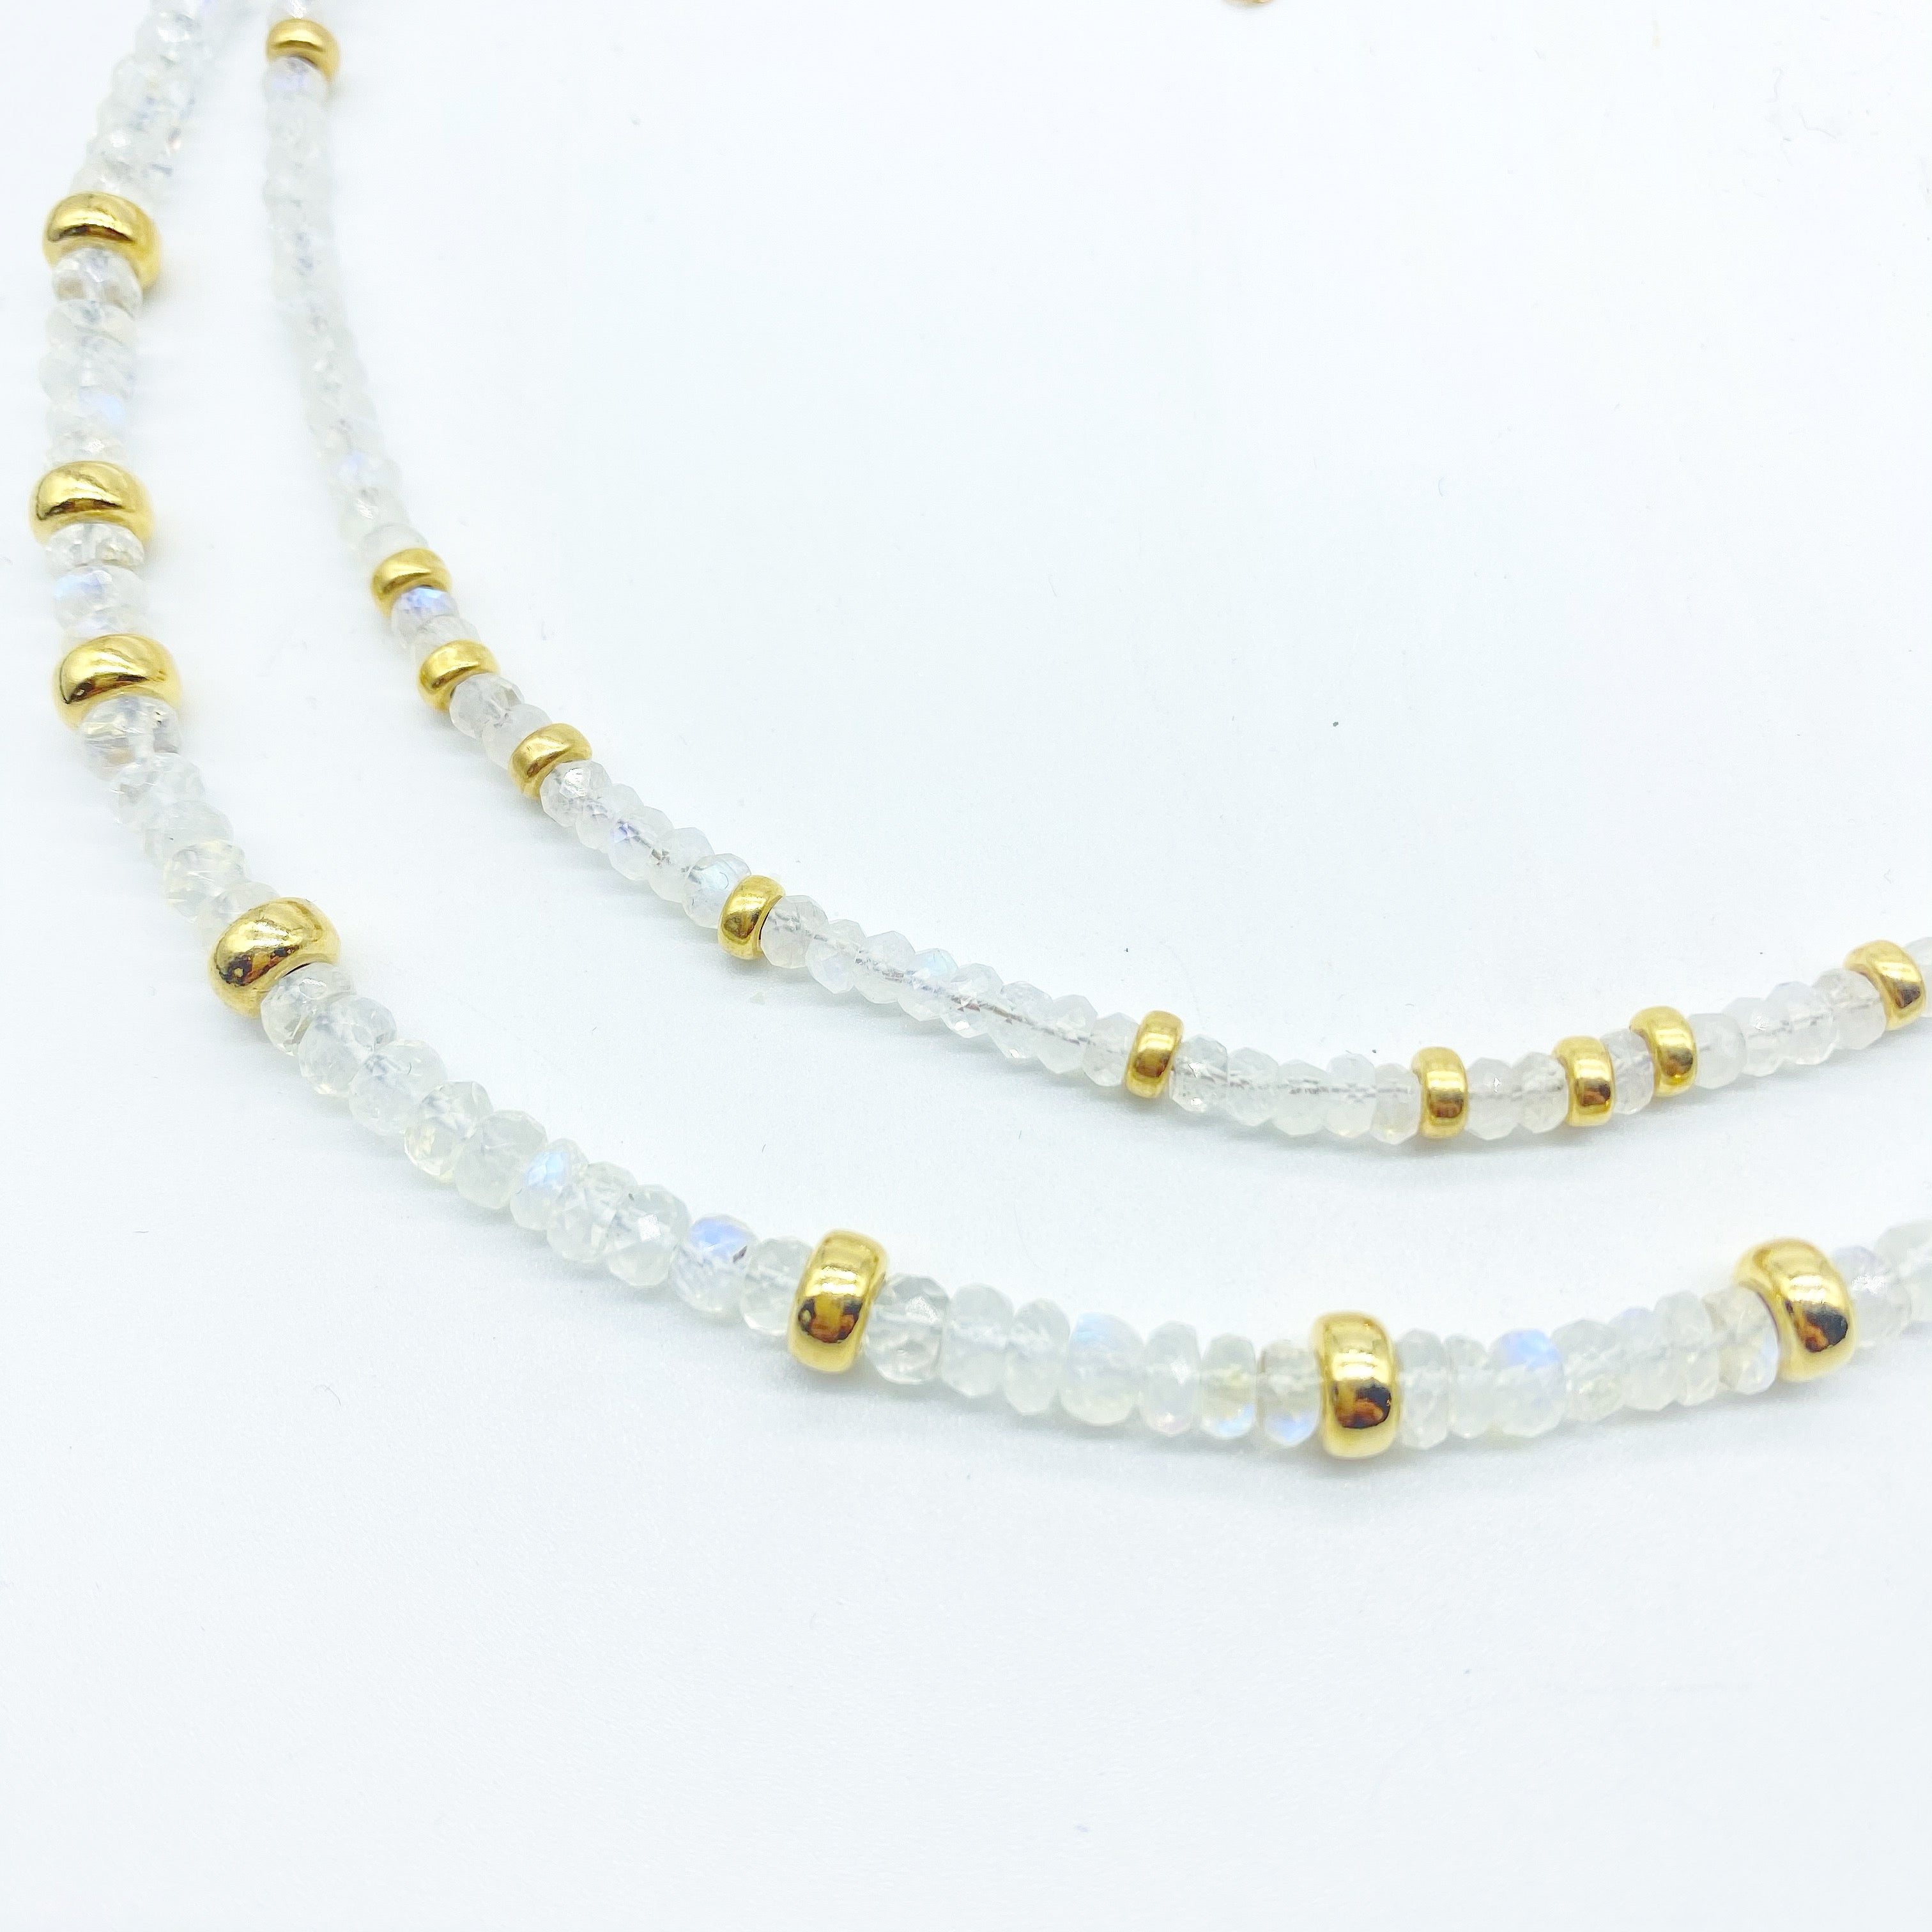 MOONSTONE MAGIC STACKING NECKLACES